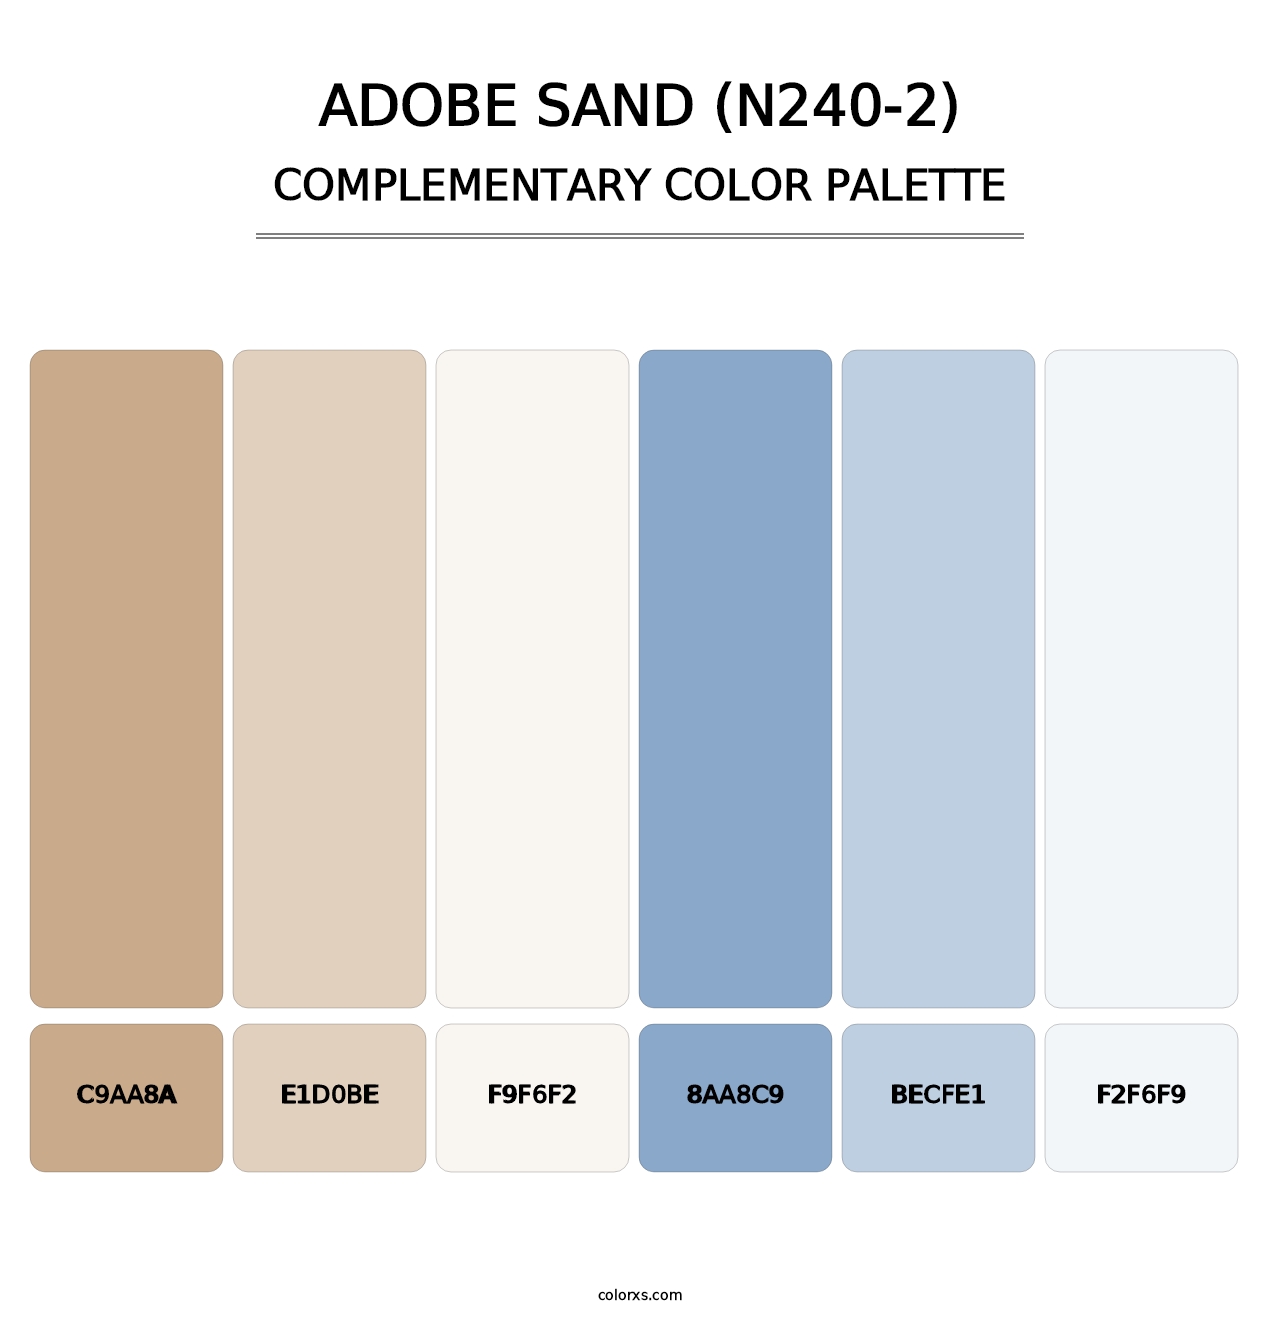 Adobe Sand (N240-2) - Complementary Color Palette